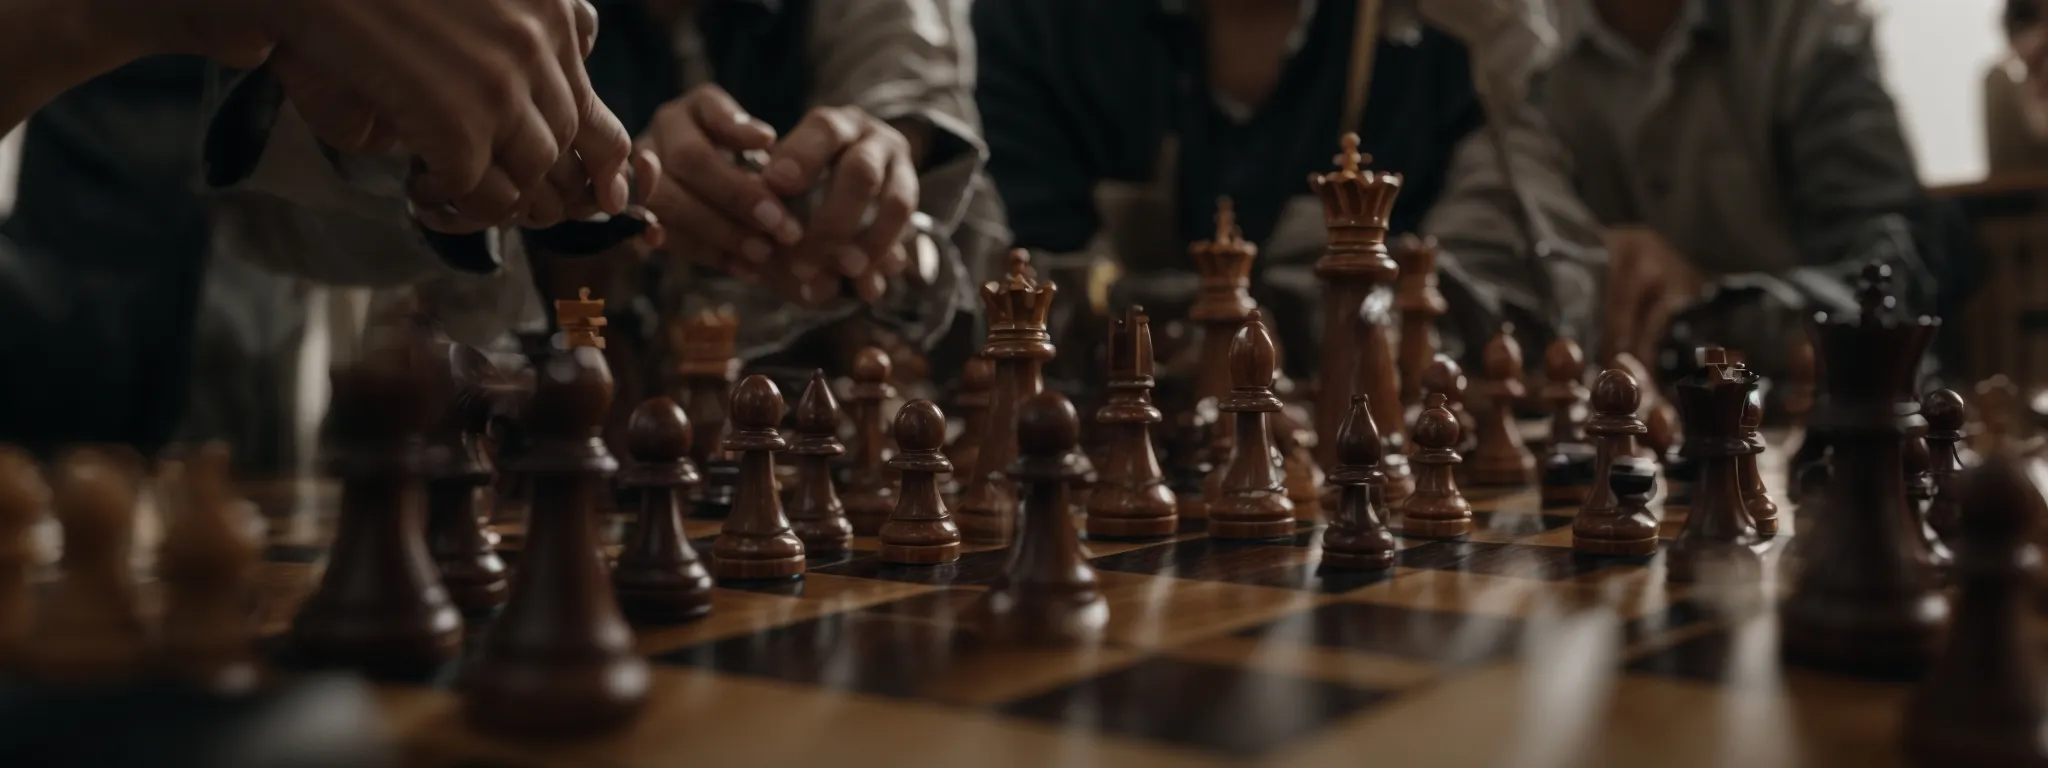 a strategic battle scene with chess pieces on a board highlighting a pivotal move.